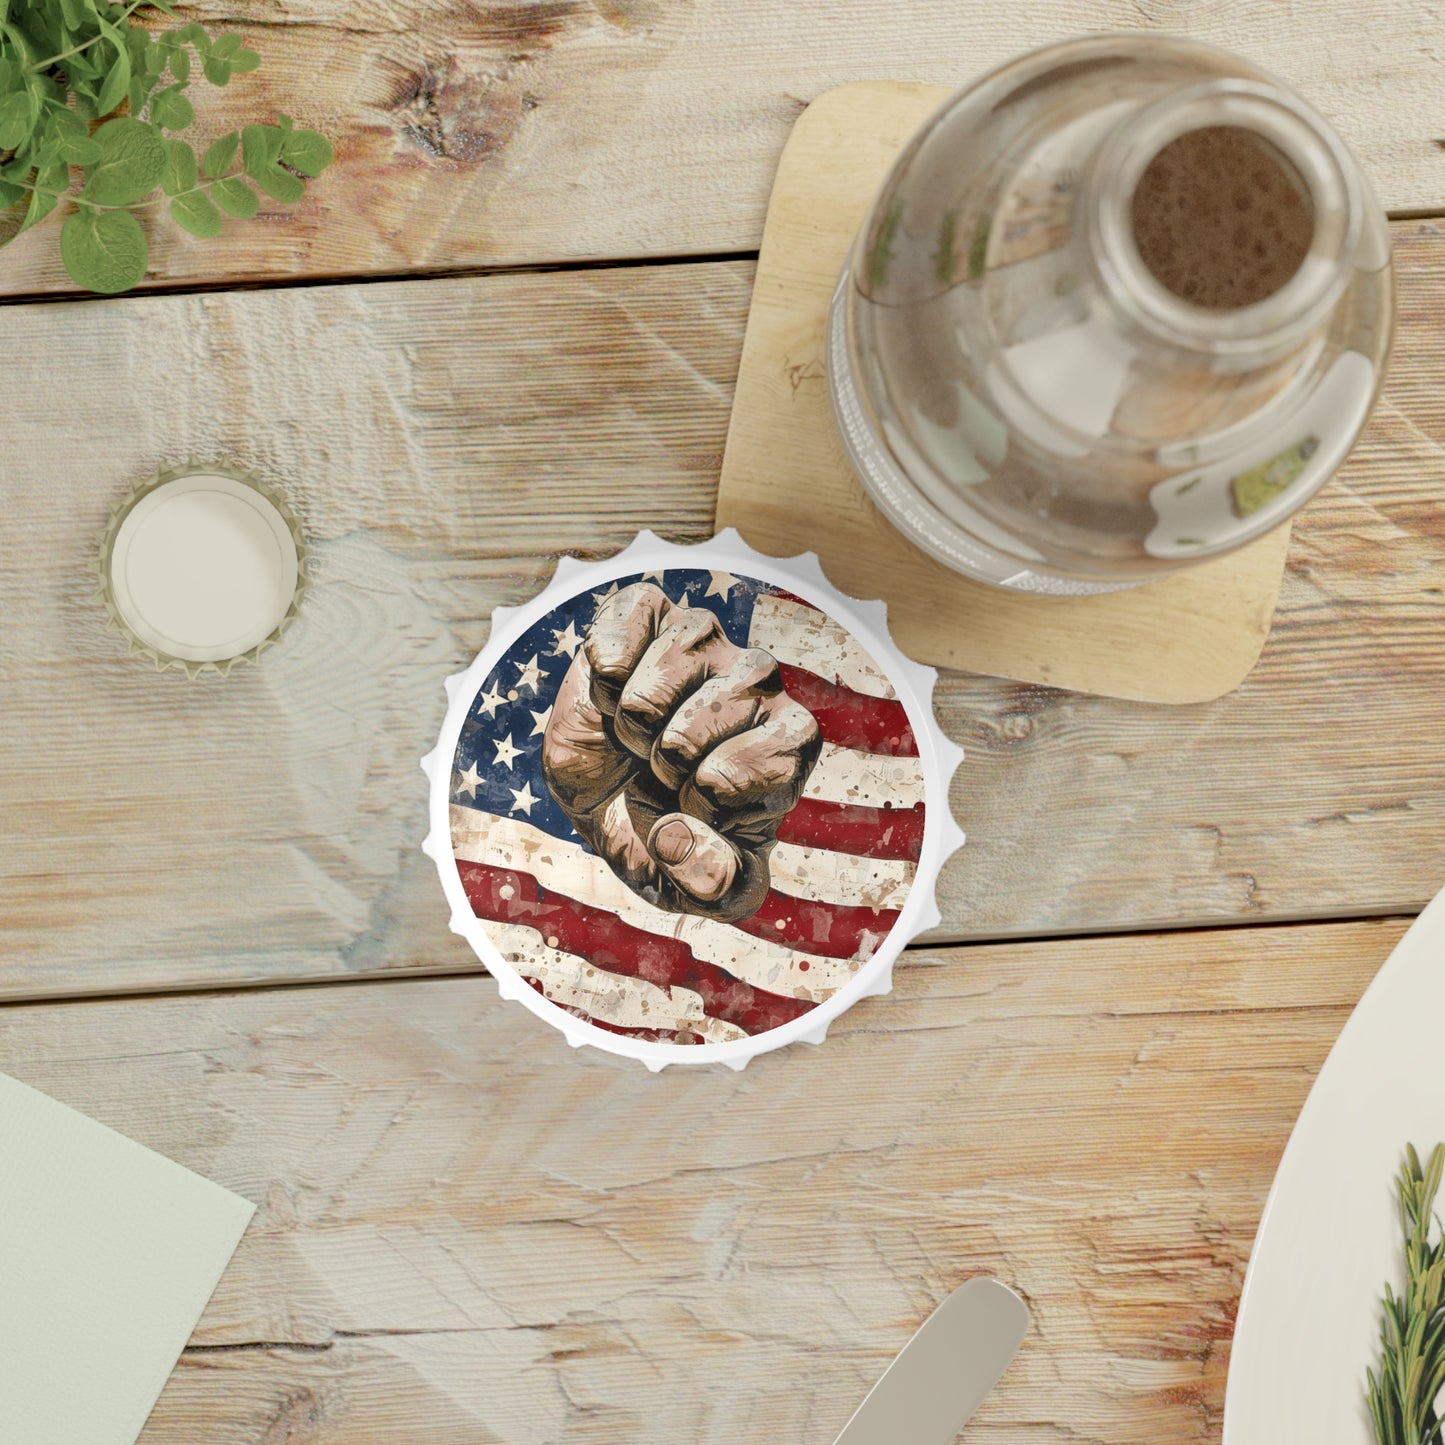 American Flag and Fist Bottle Opener: Open Your Beverages with Patriotic Pride